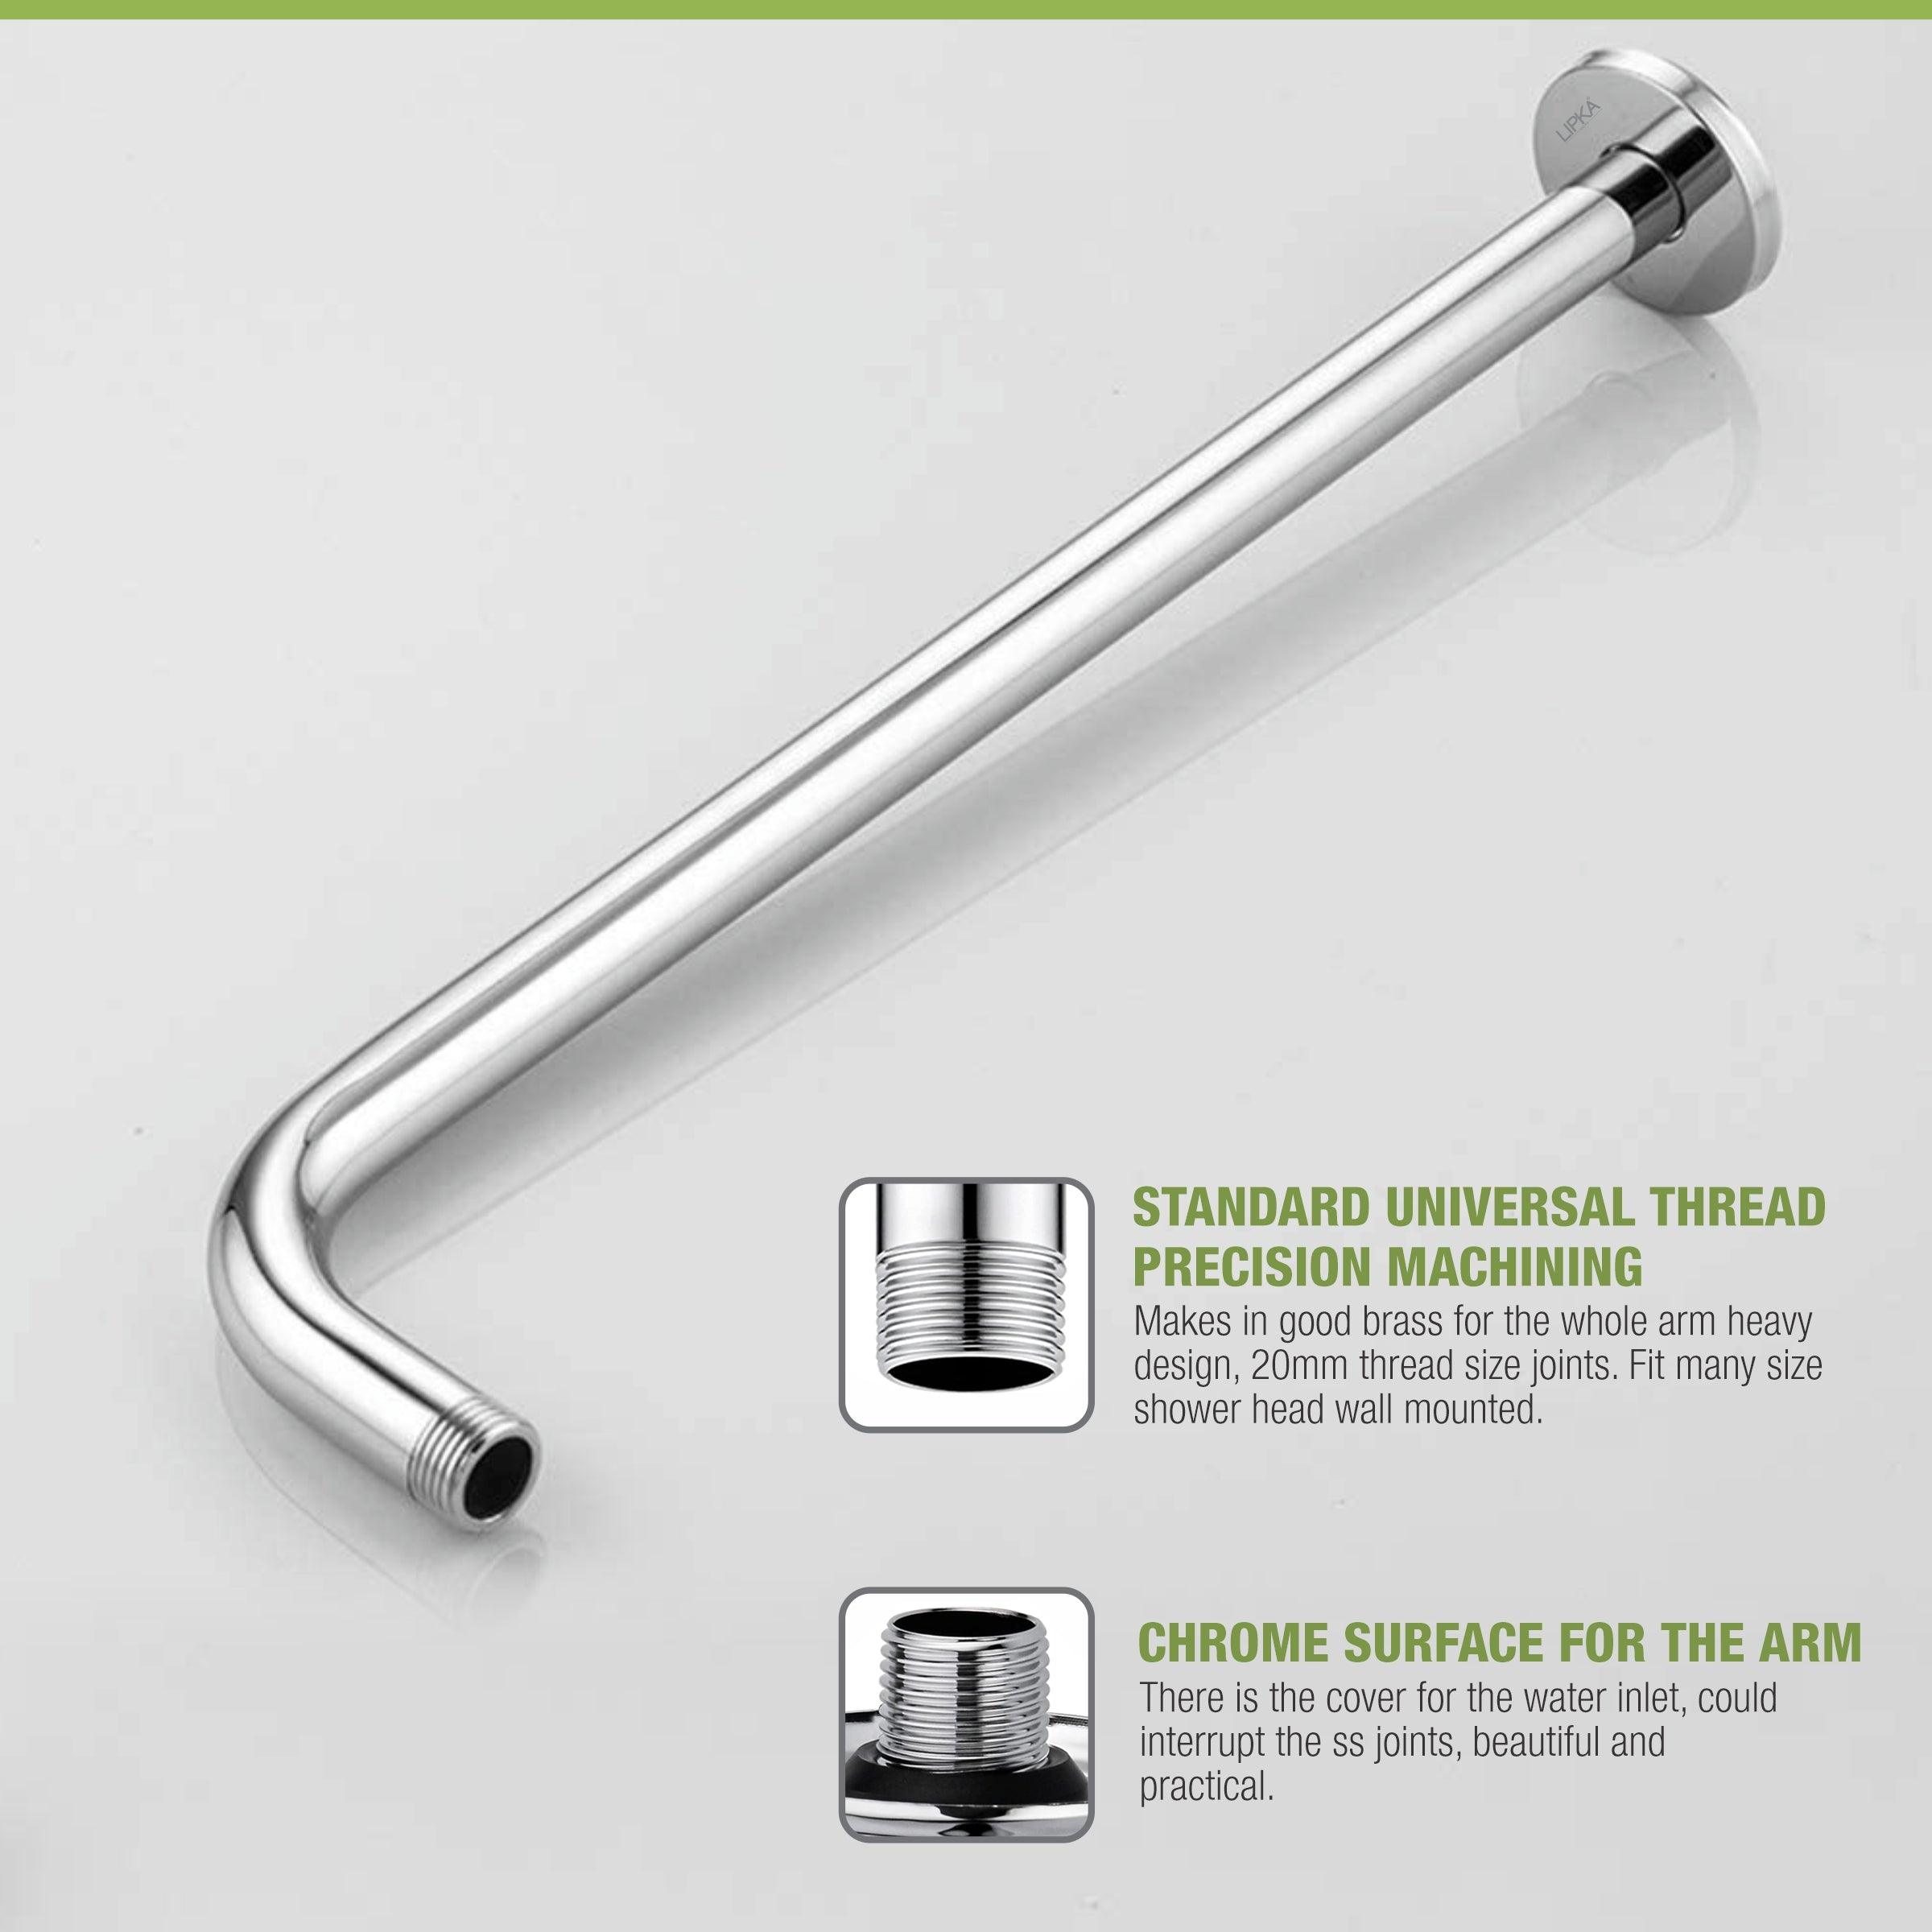 Full Bend Round Shower Arm (12 Inches) features